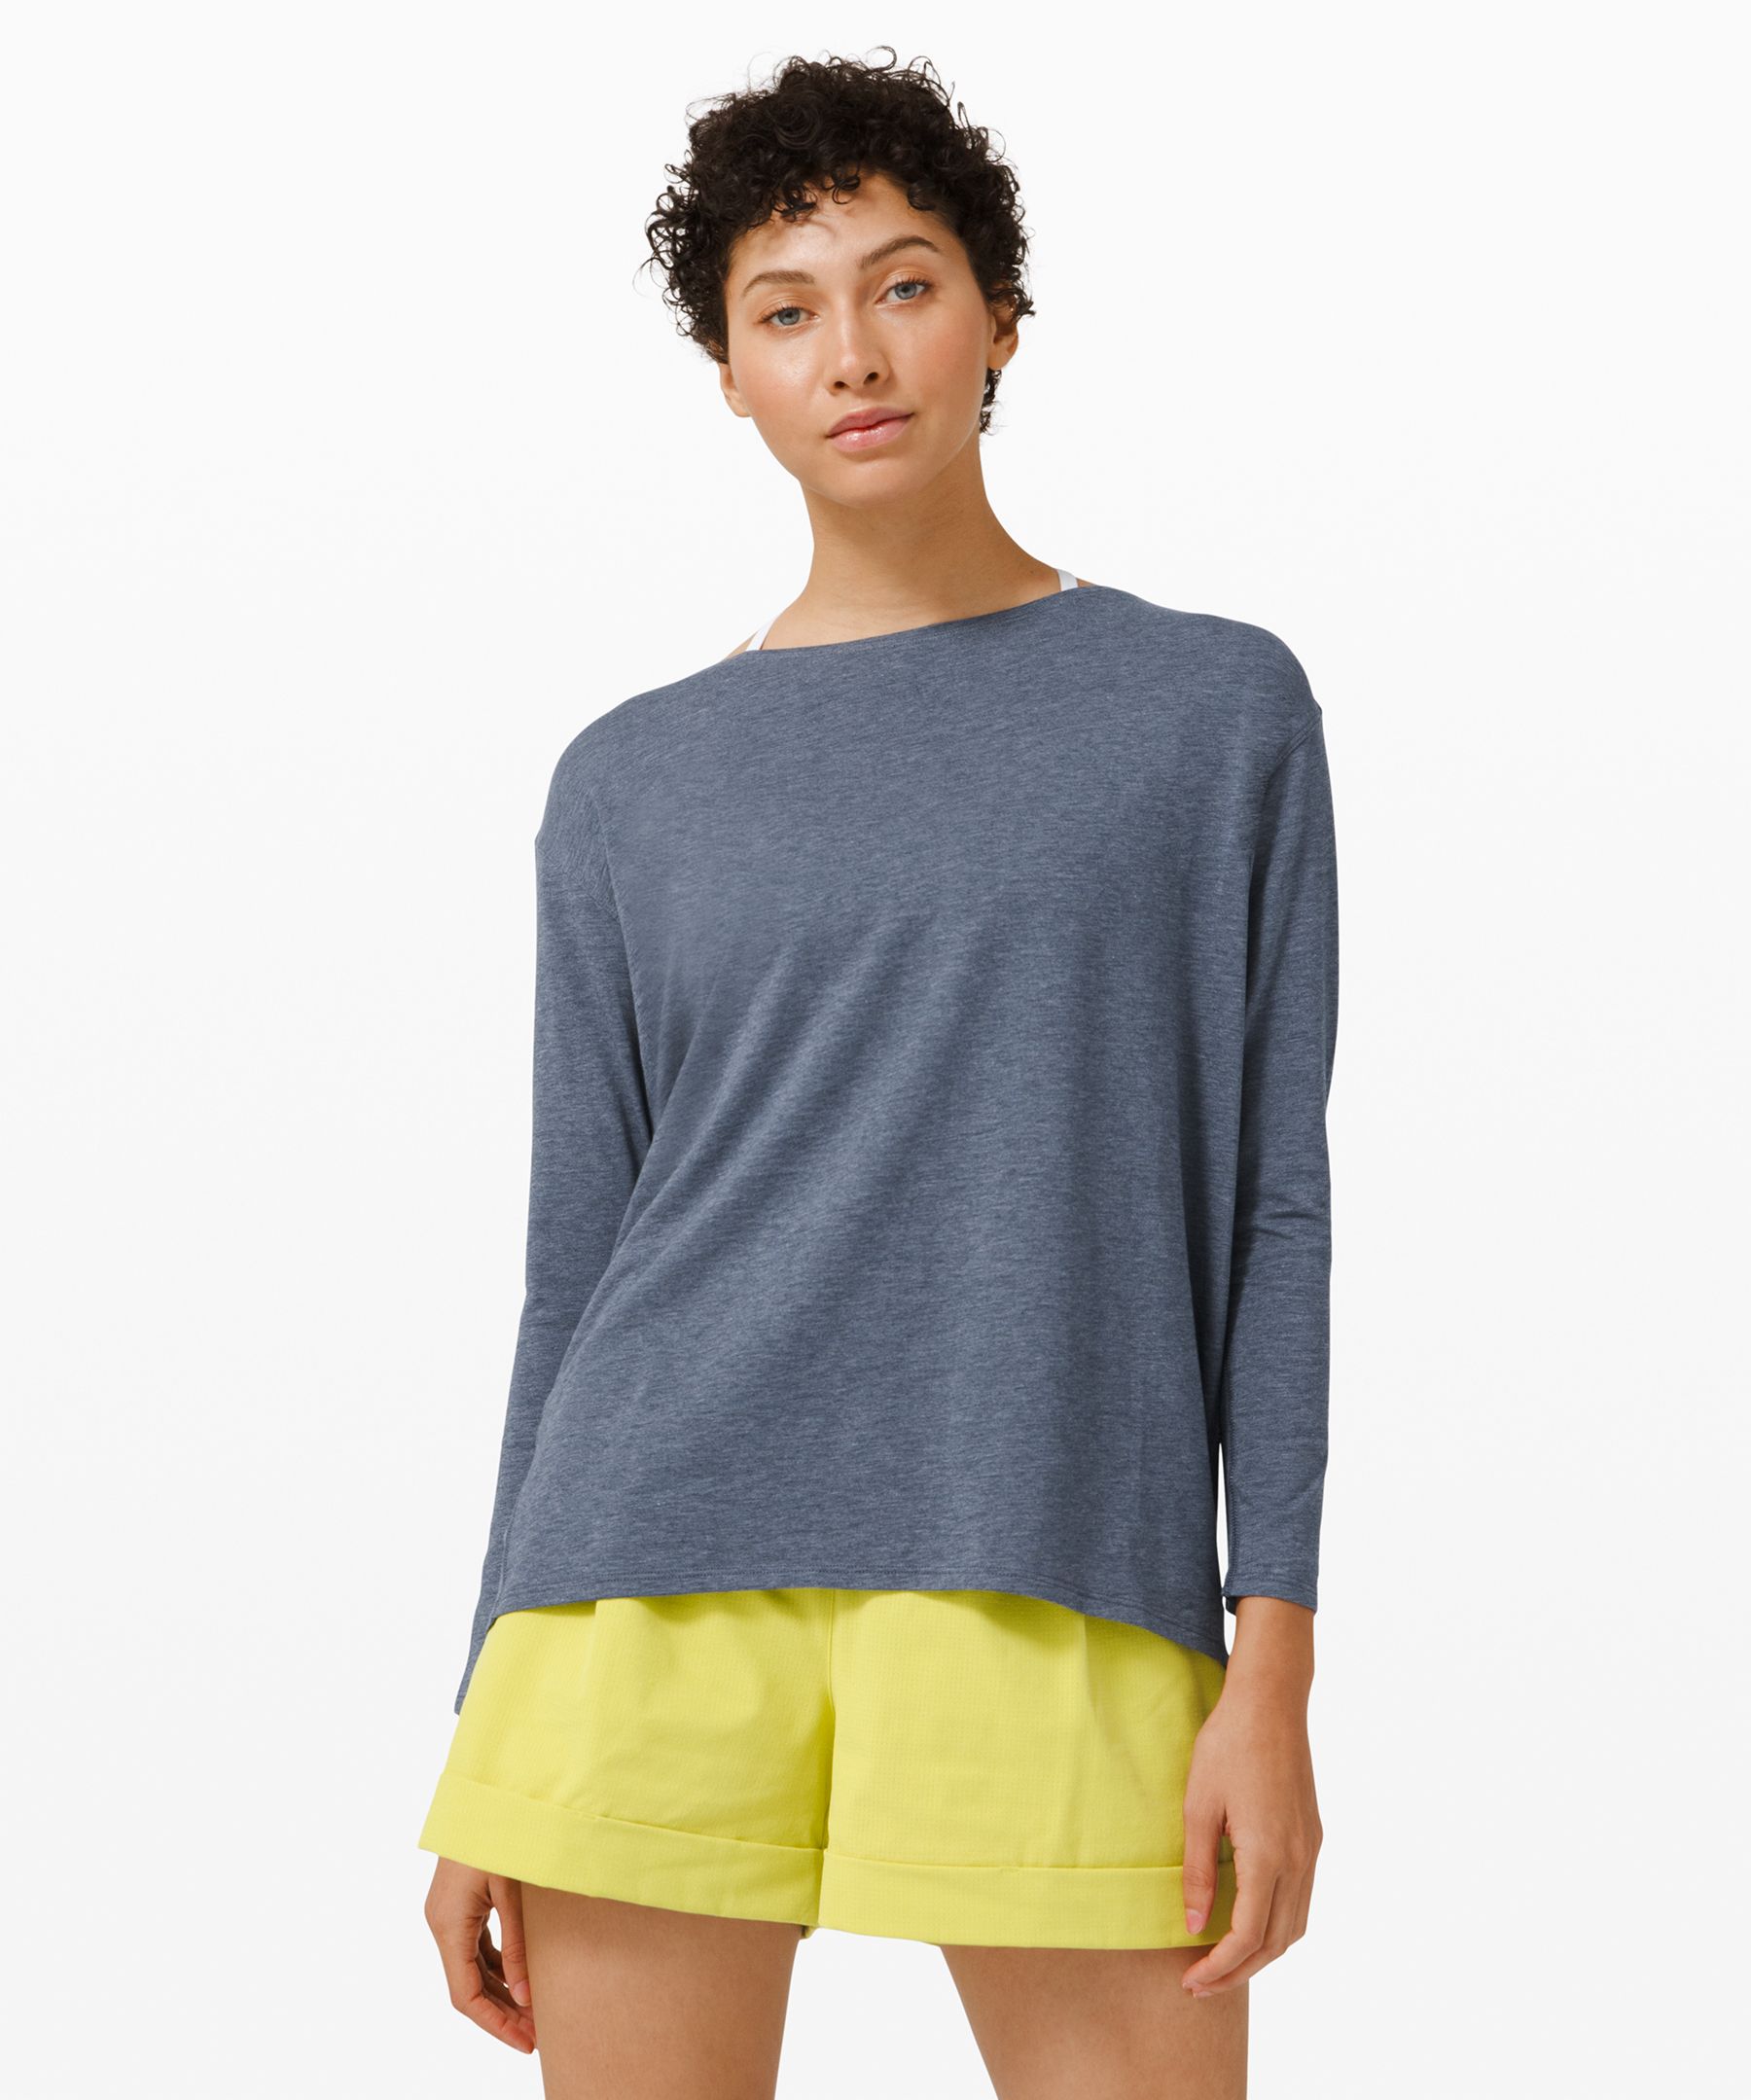 Lululemon Back In Action Long Sleeve Shirt In Heathered Code Blue